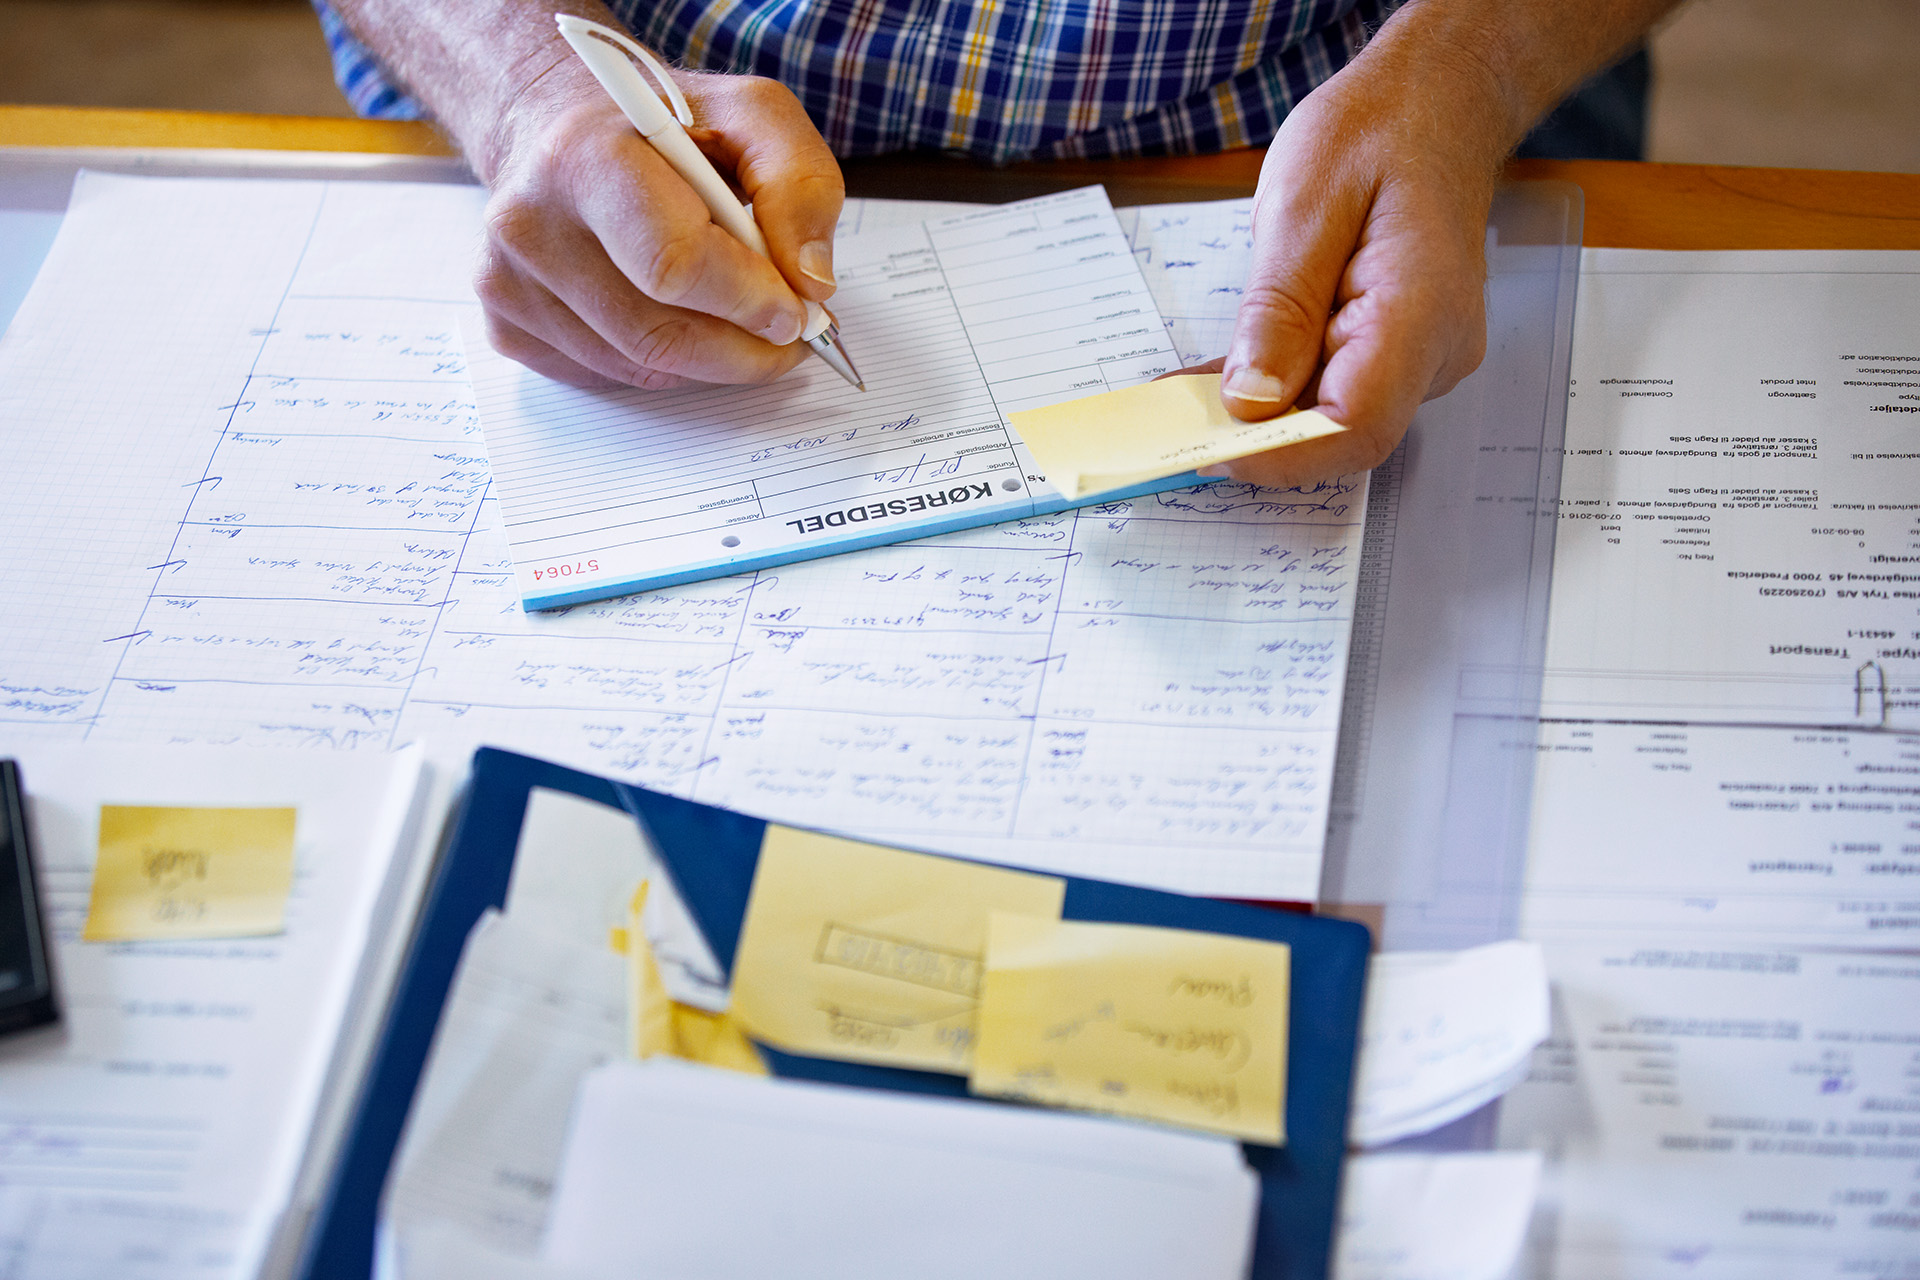 A close up image of hands on a notepad covered with writing and sticky notes.